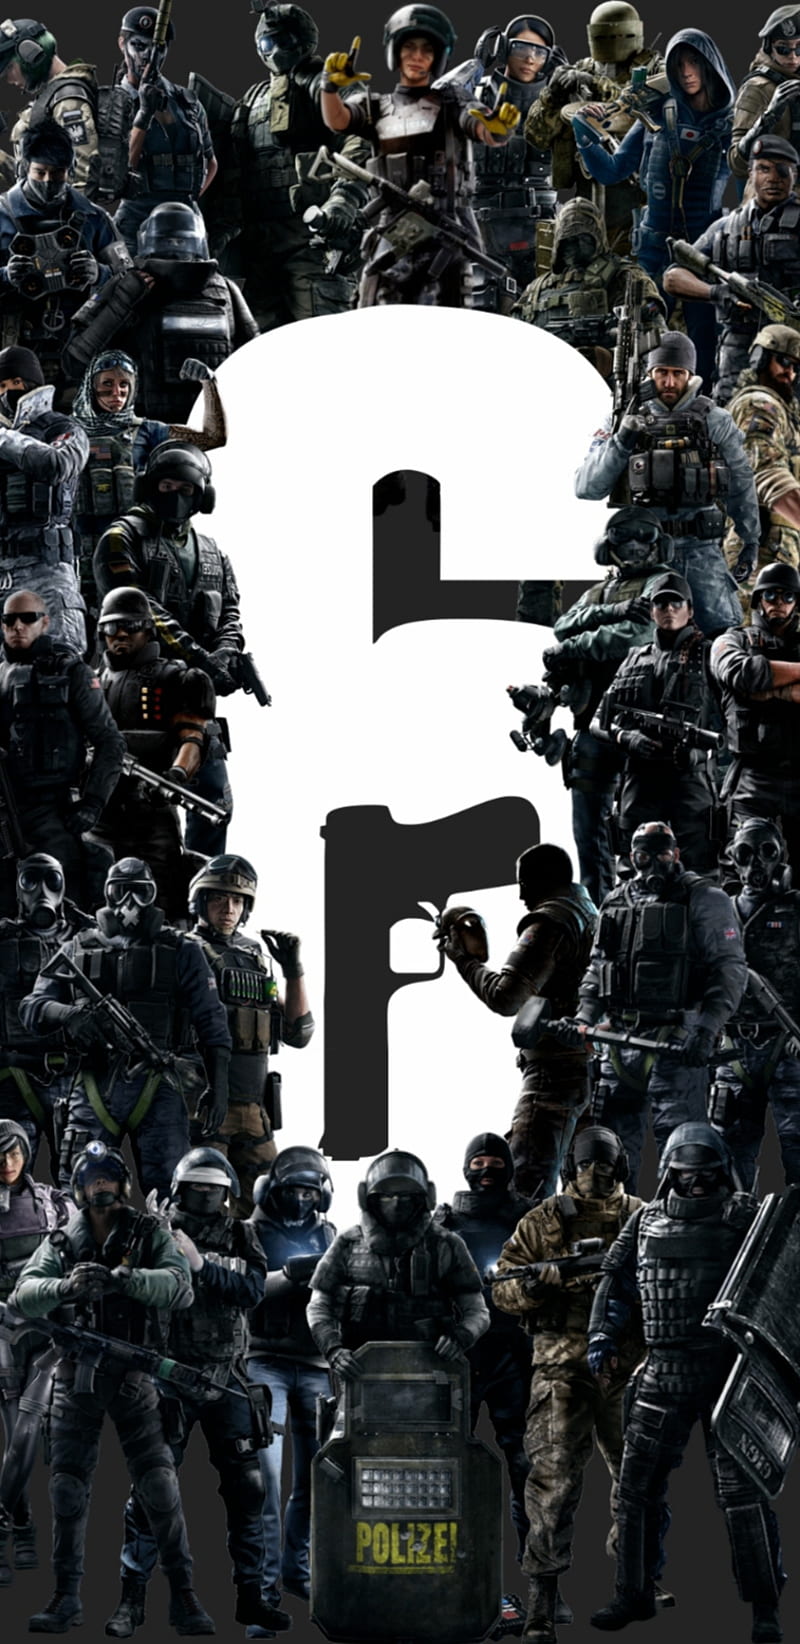 Rainbow Six Siege Wallpapers (70+ images)